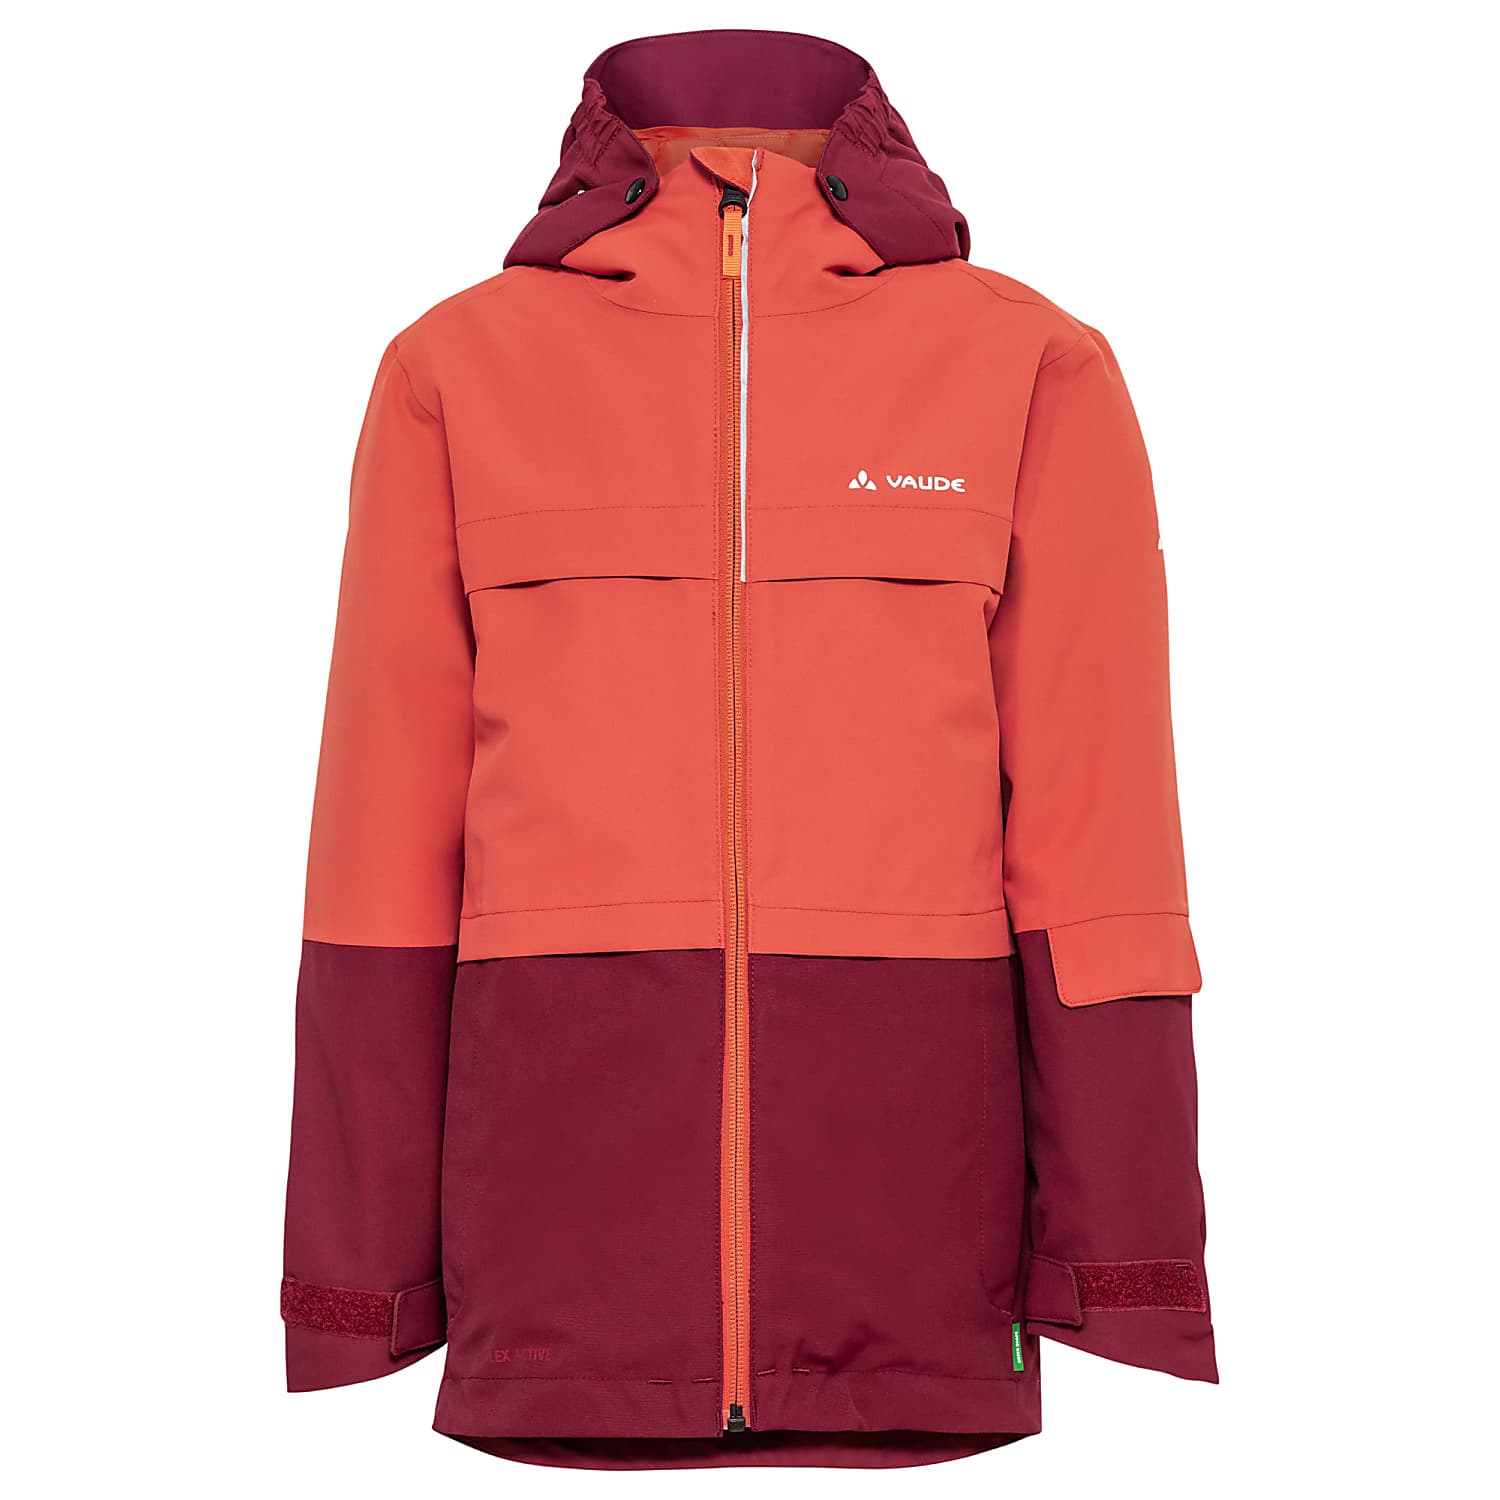 Vaude KIDS SNOW CUP 3IN1 JACKET Free at Chili II, starts Hot Shipping - 60£